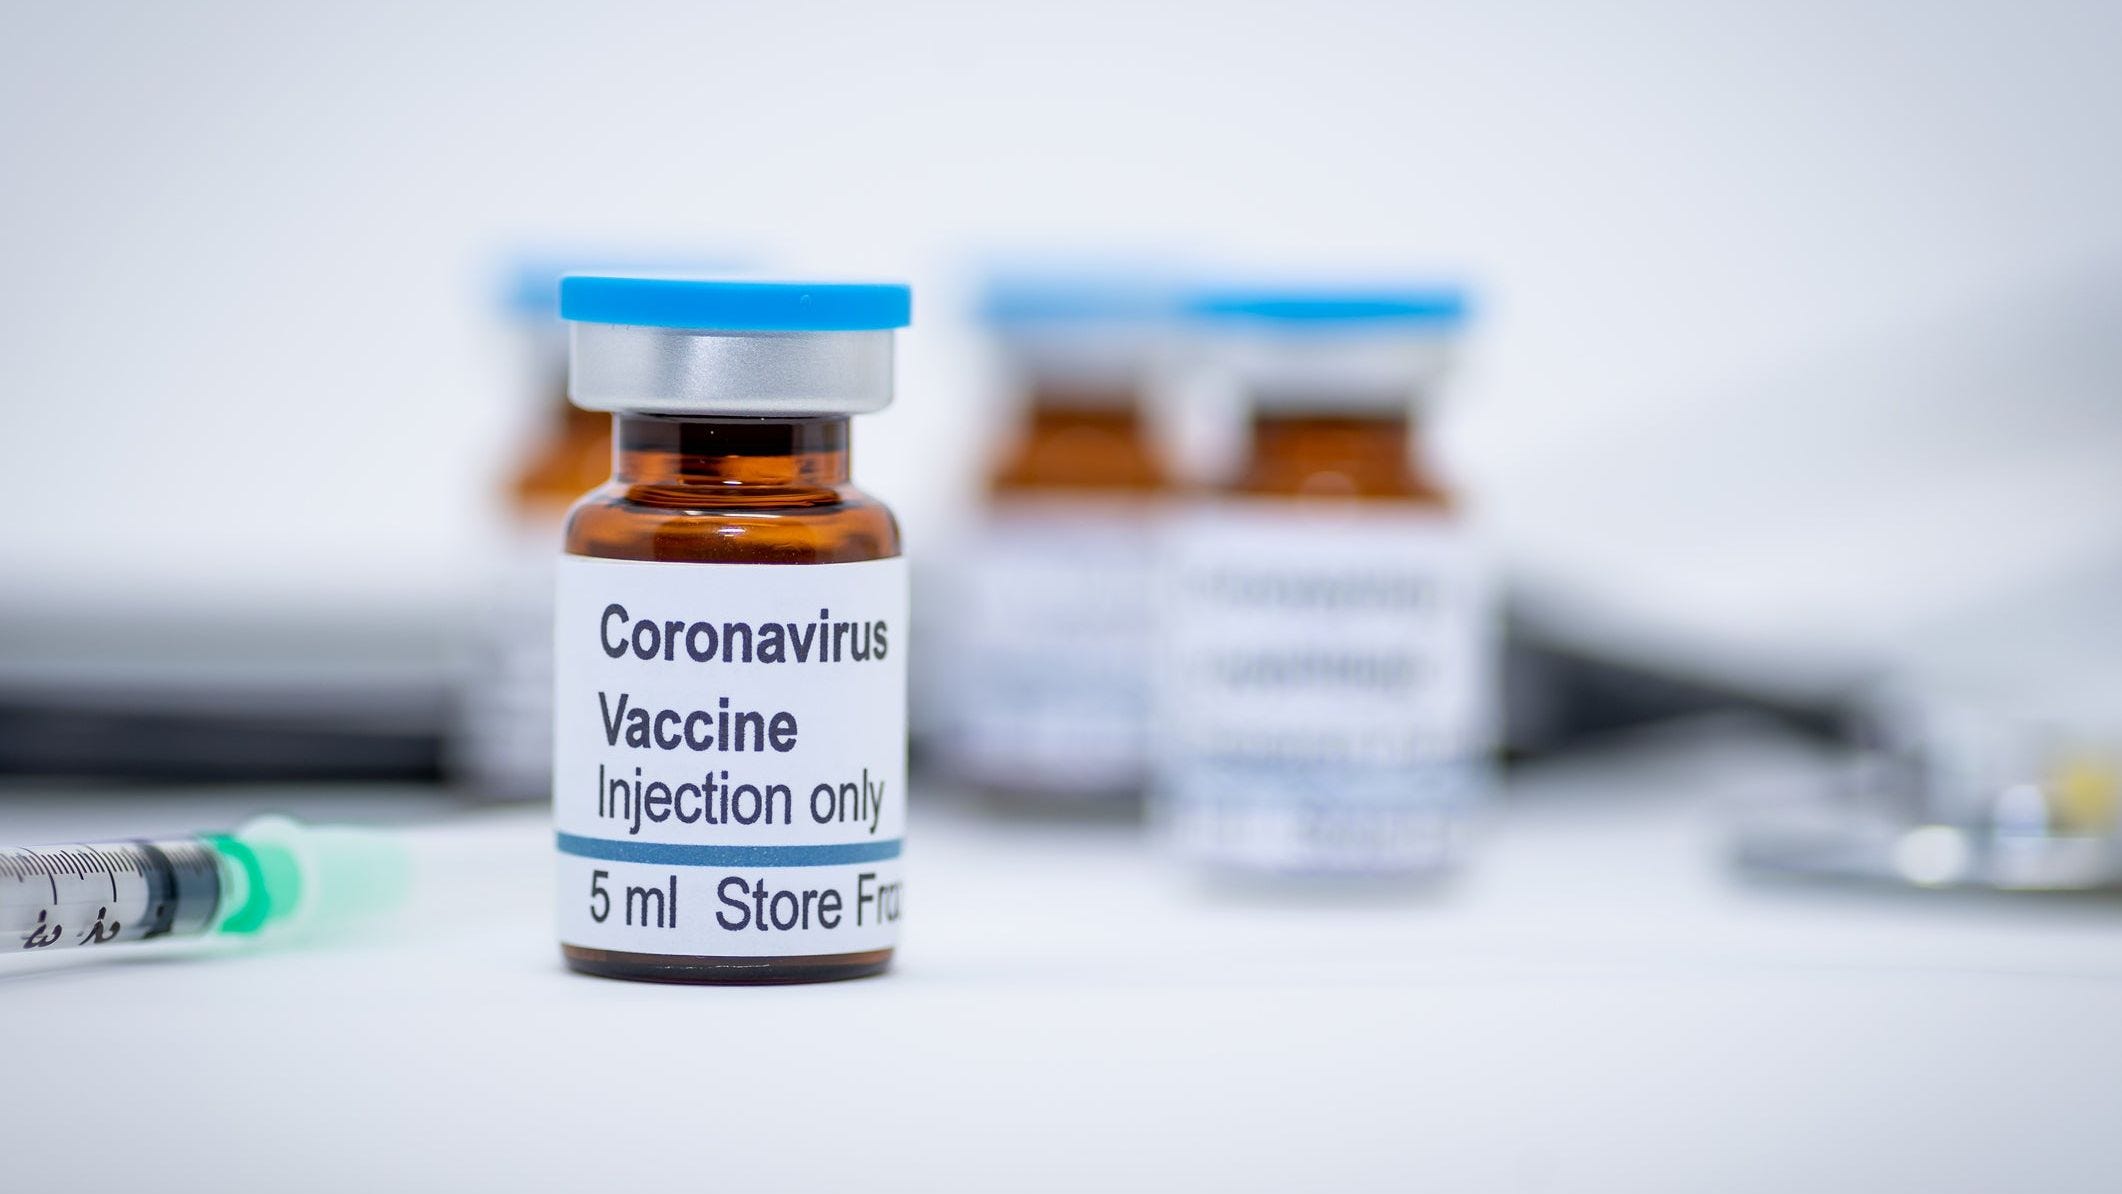 Russia to supply 100-mn doses of Sputnik COVID vaccine to India’s Dr Reddy, inks pact